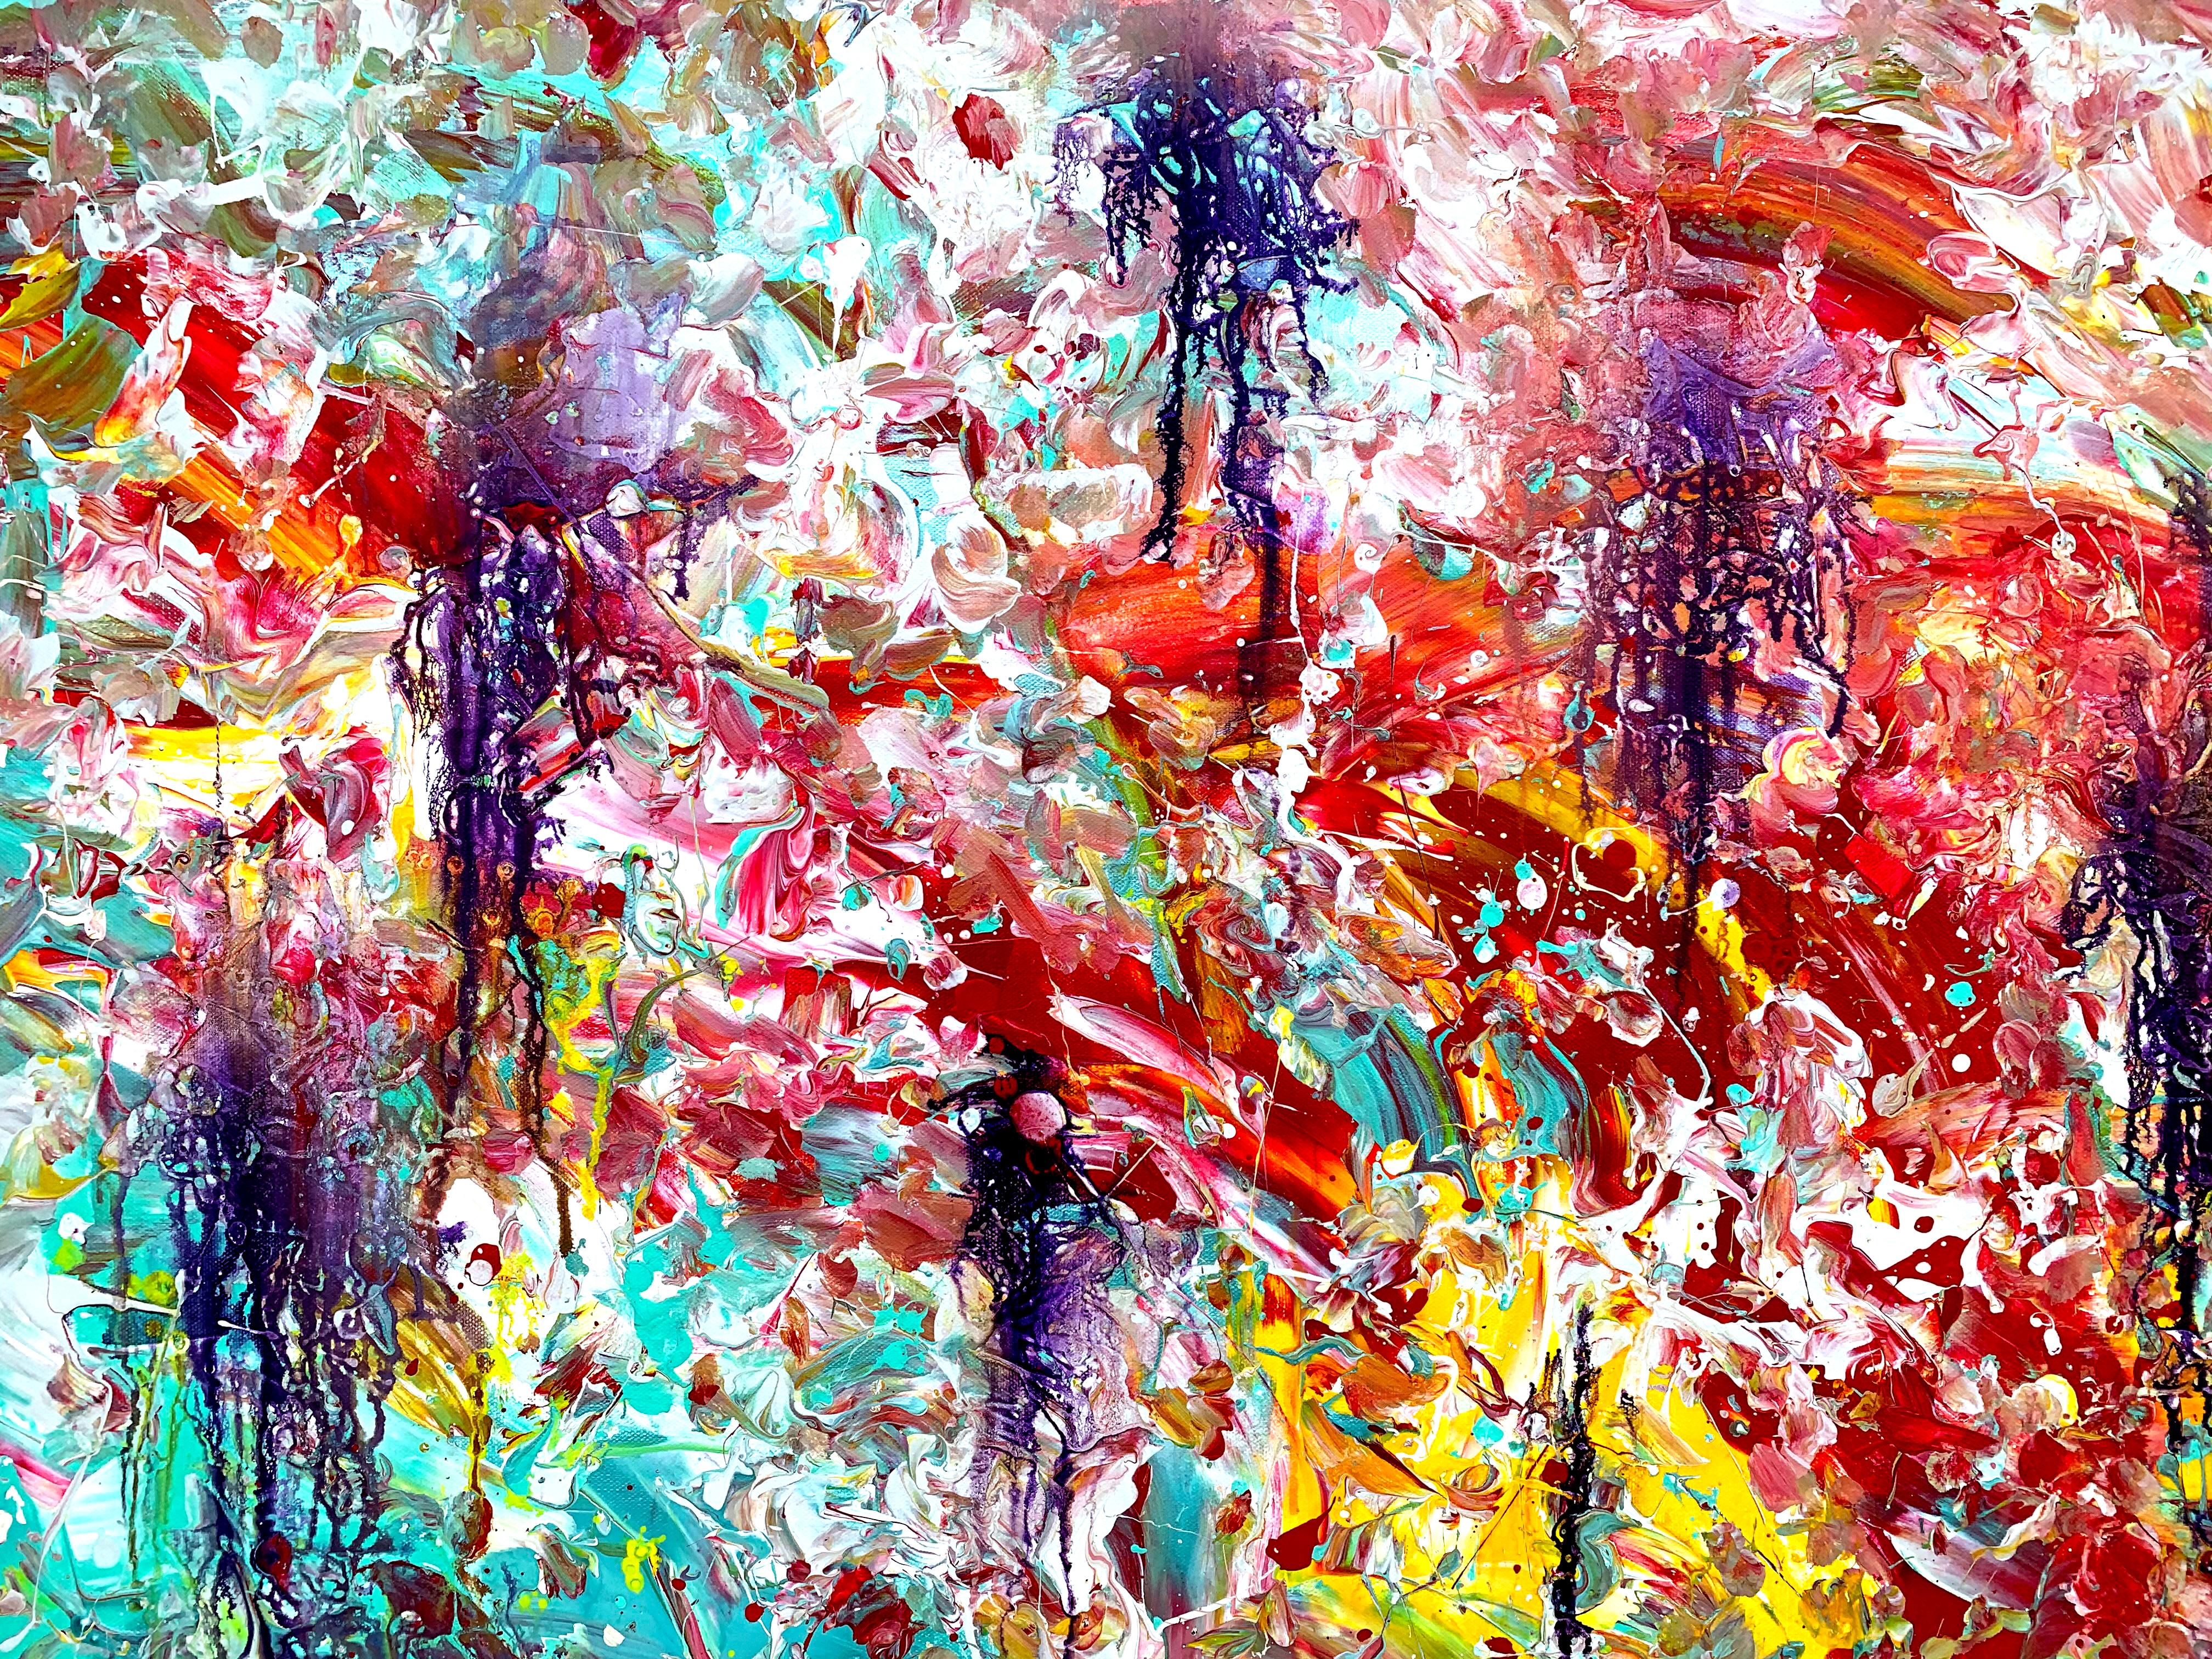 Infusing Retrospection - Abstract Expressionist Painting by Estelle Asmodelle